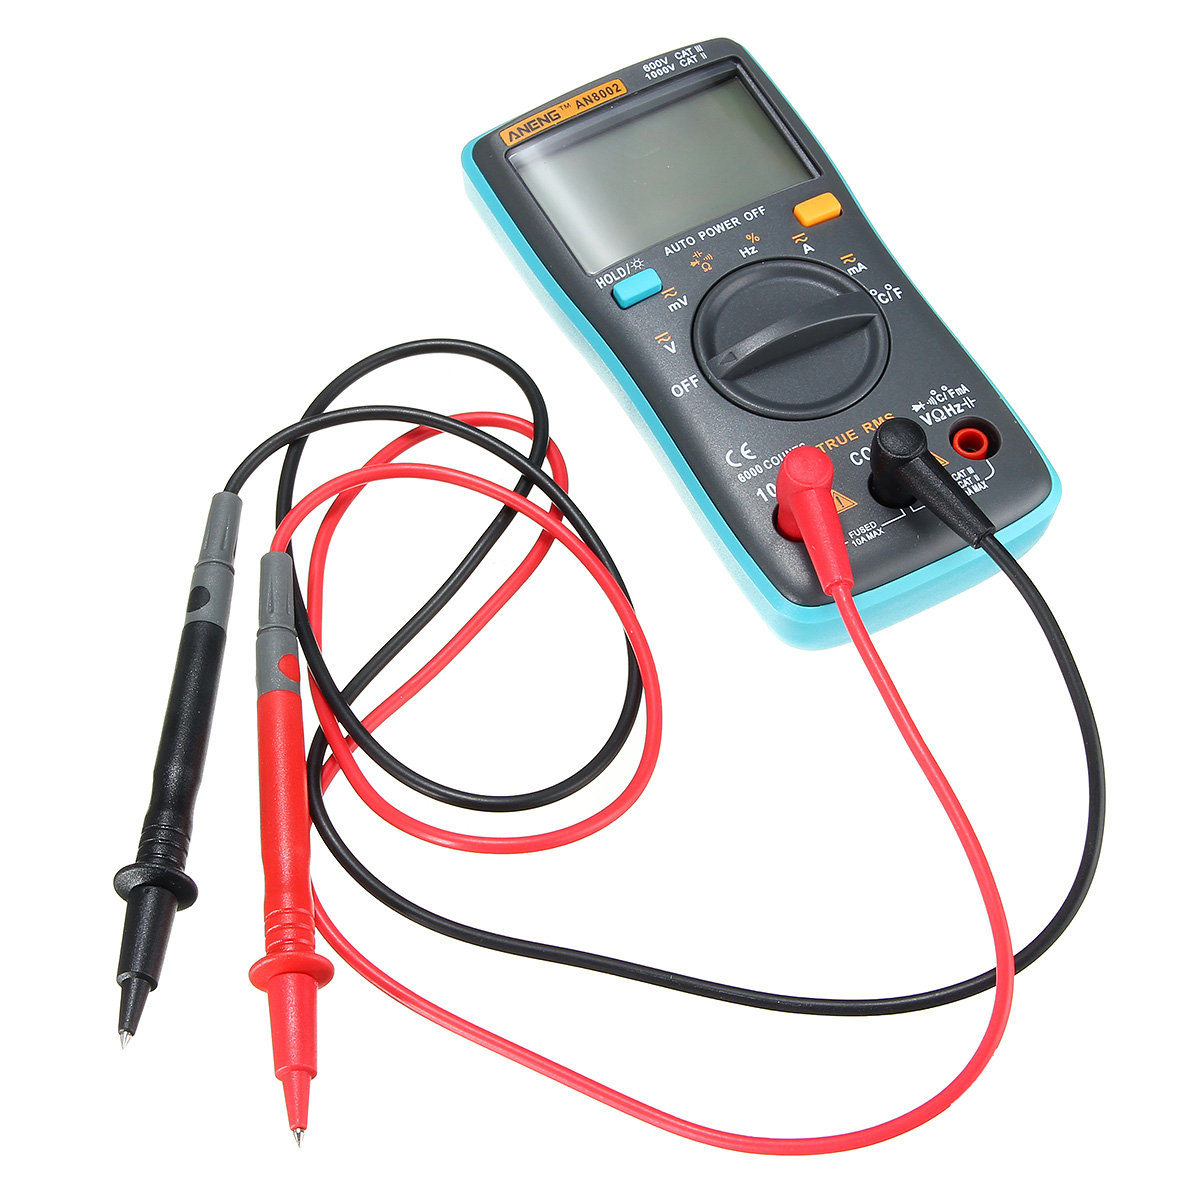 ANENG AN8002 Digital True RMS 6000 Counts Multimeter AC/DC Current Voltage Frequency Resistance Temperature Tester ℃/℉ 151